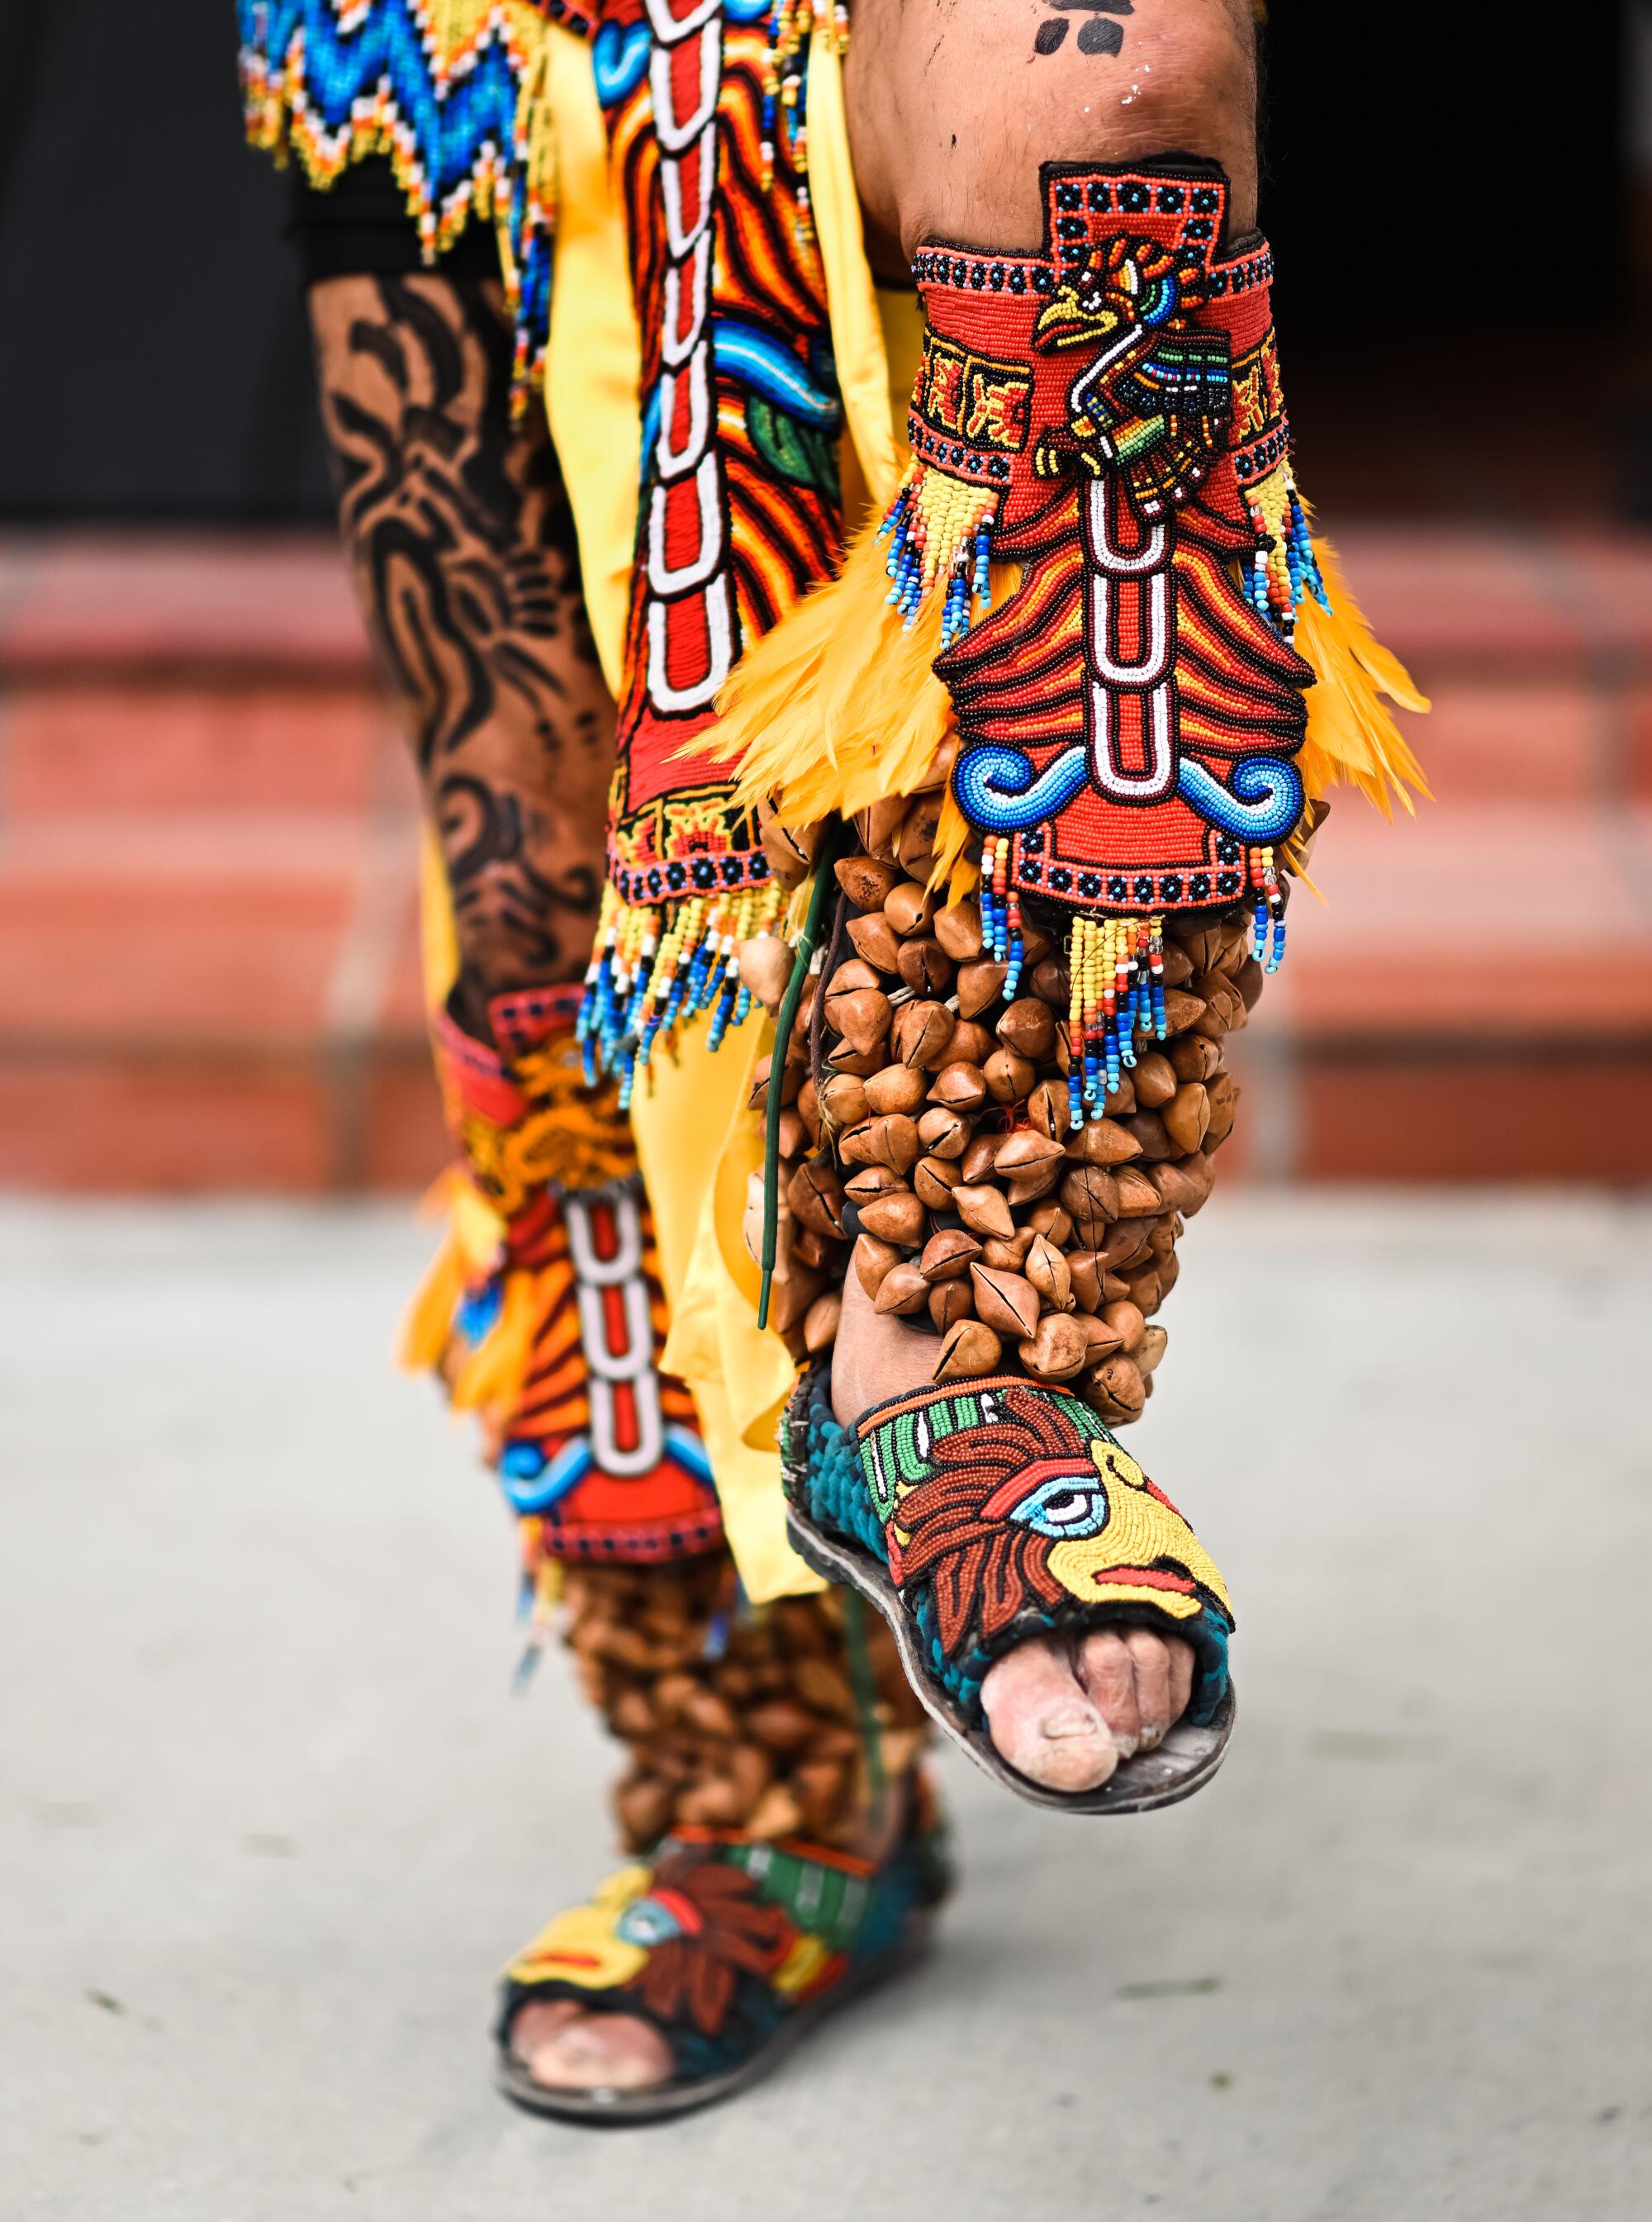 A close-up of two legs in regalia dancing